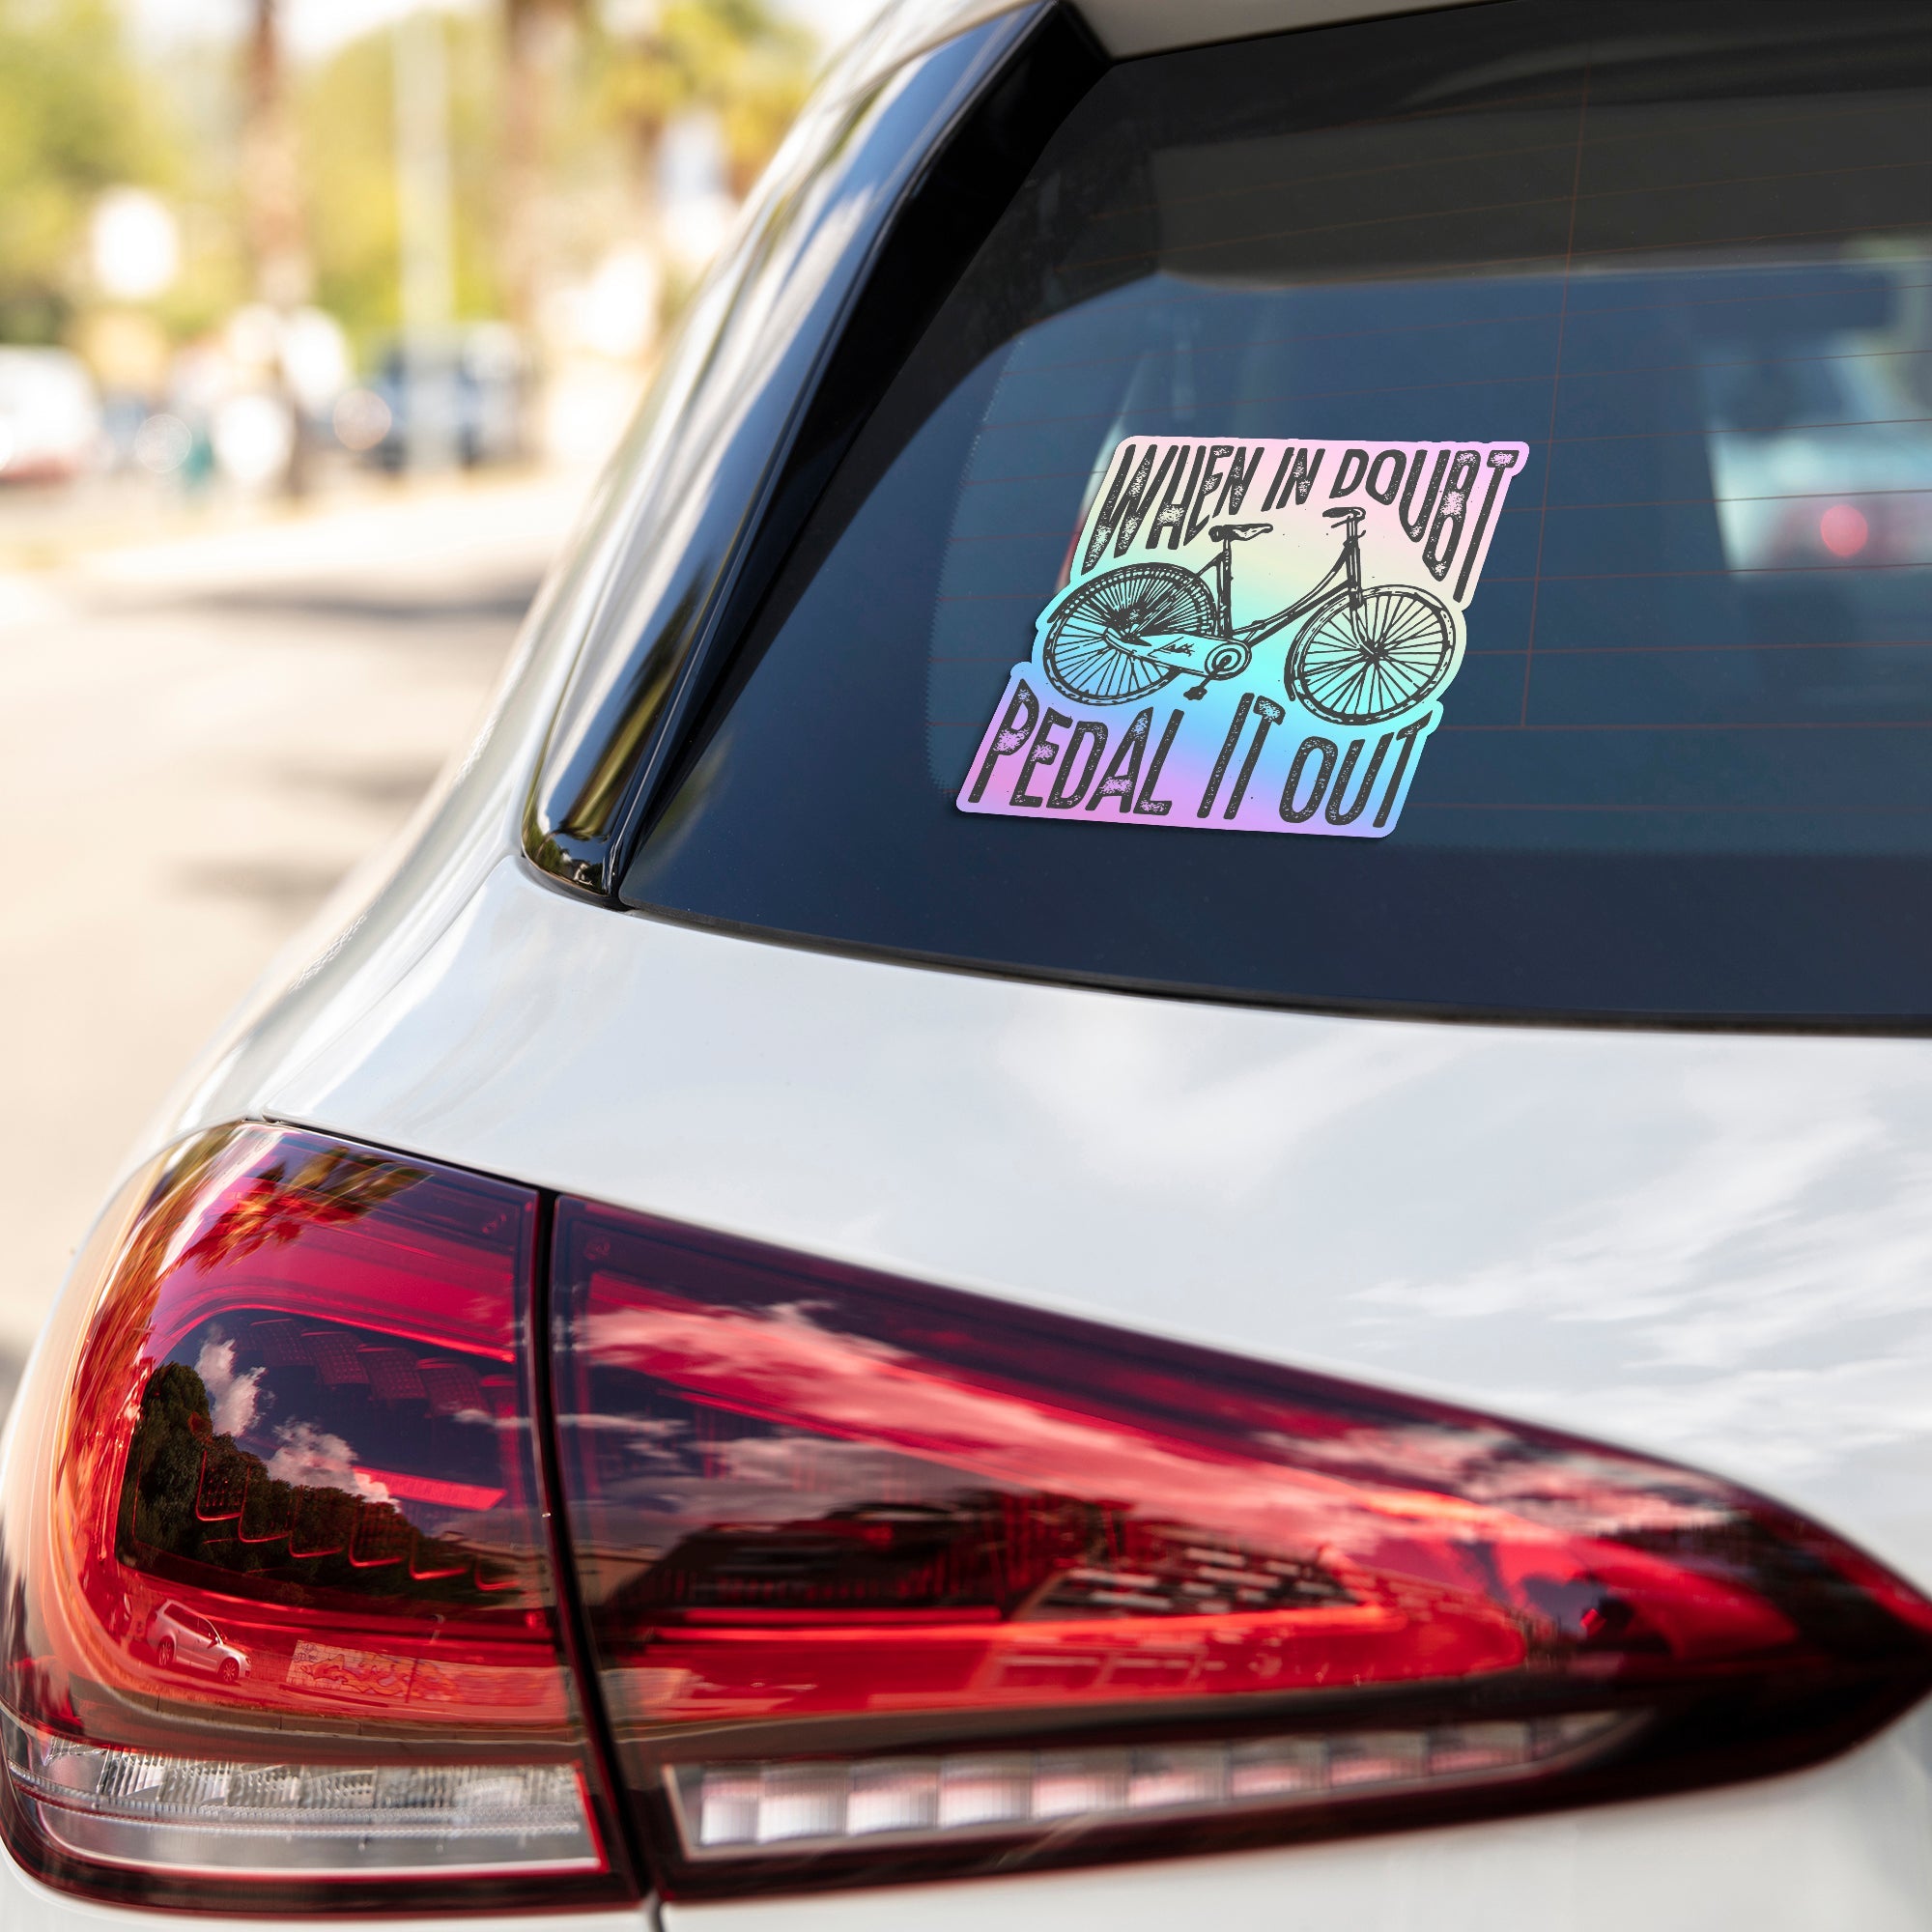 When In Doubt Pedal It Out Holographic Stickers